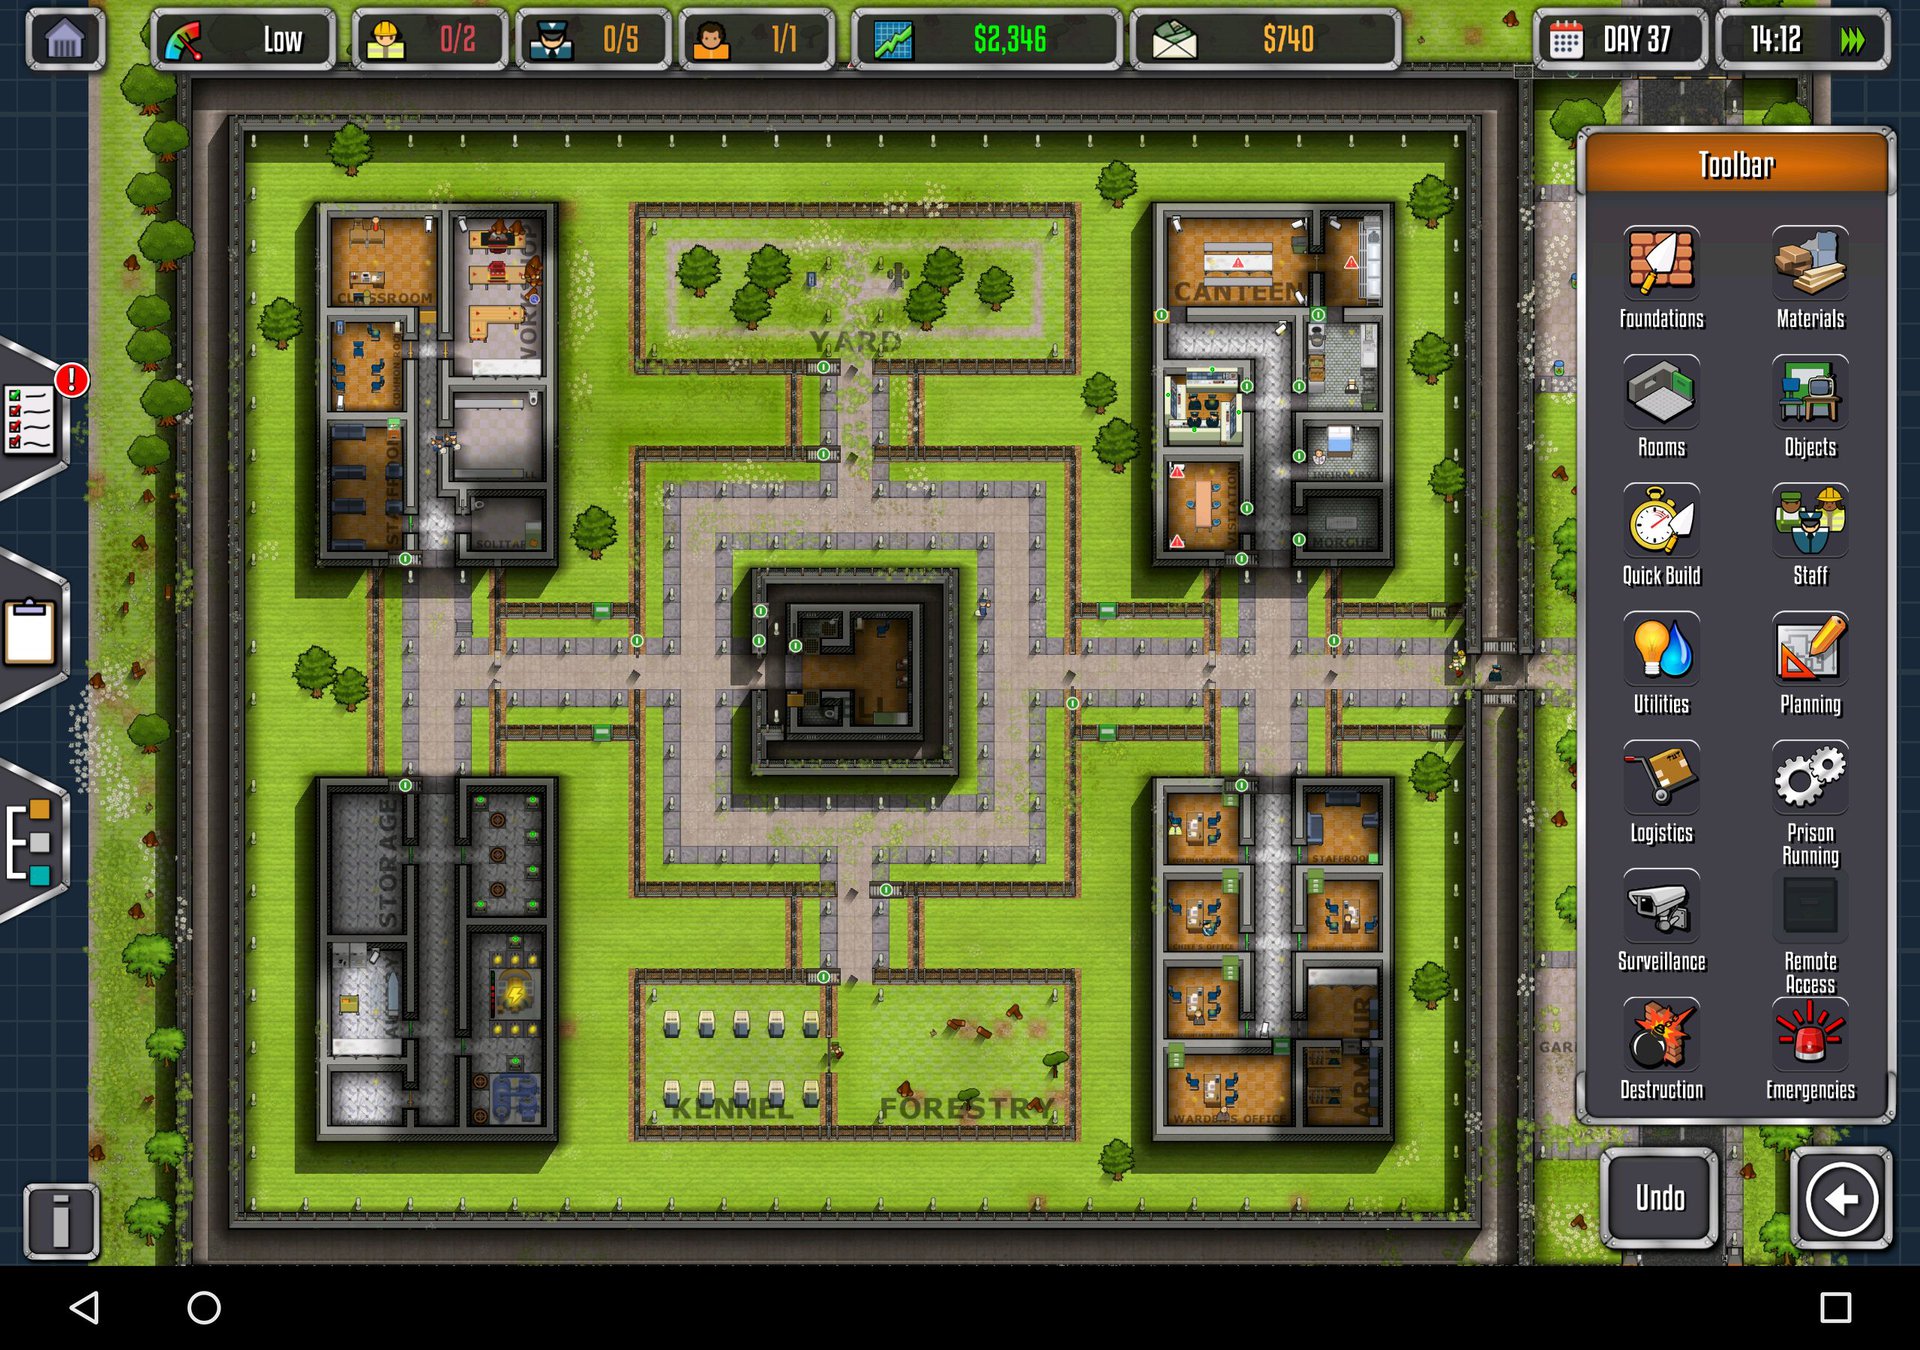 10. "Prison Architect" easter egg: Secret character with blue hair hidden in the game - wide 1